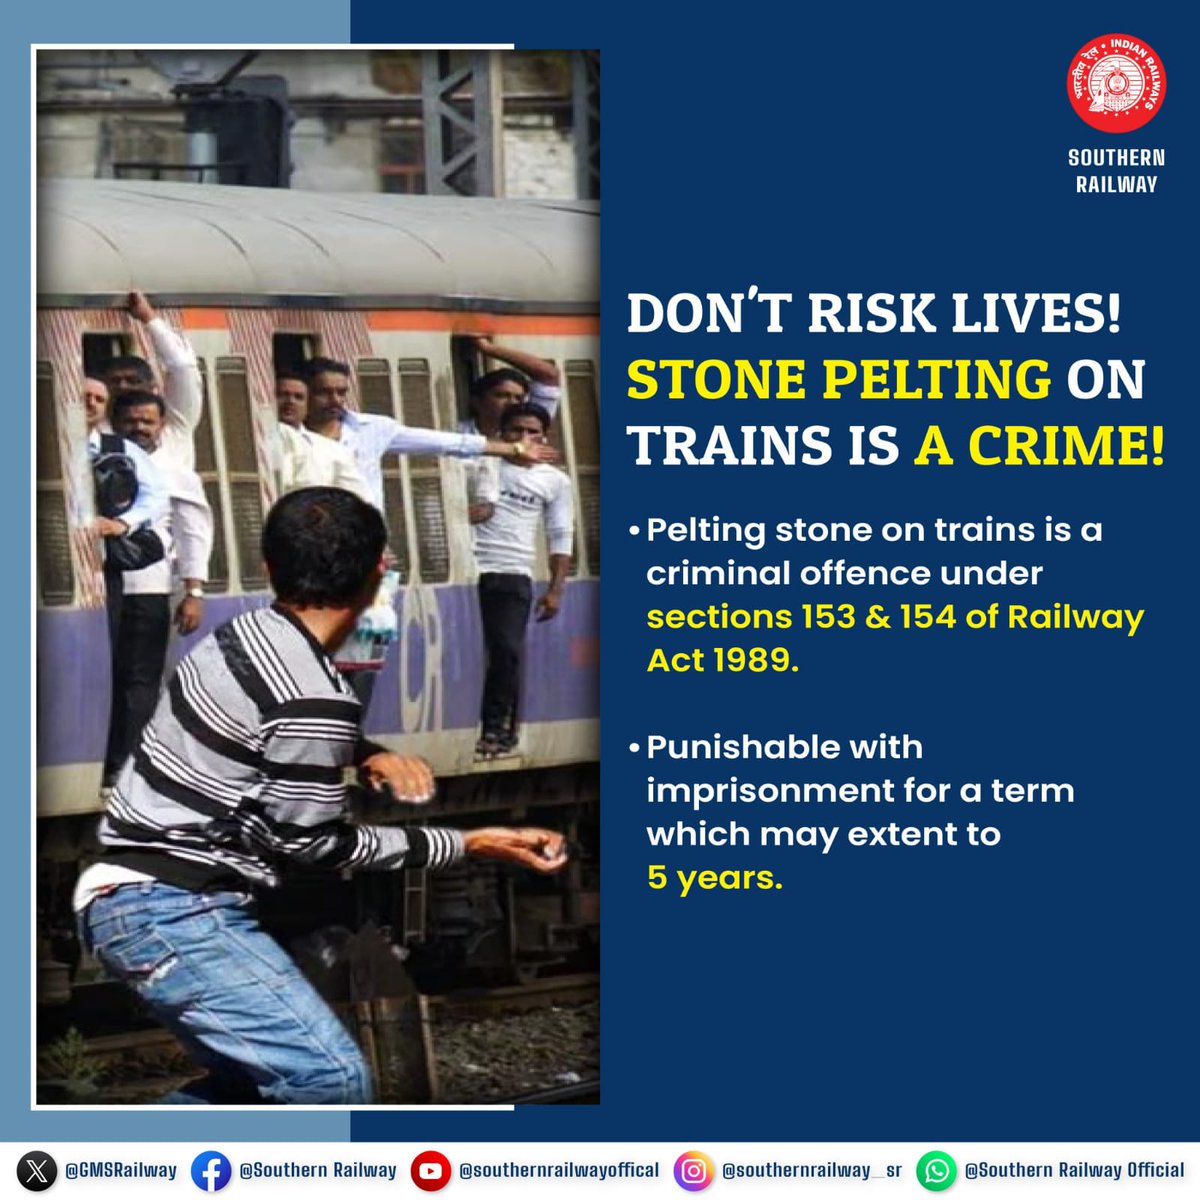 Throwing stones at trains is a serious criminal offense, punishable by up to five years in prison according to section 153. Let's prioritize passenger safety and maintain the integrity of railway operations. #RailwaySafety #ZeroTolerance #SouthernRailway